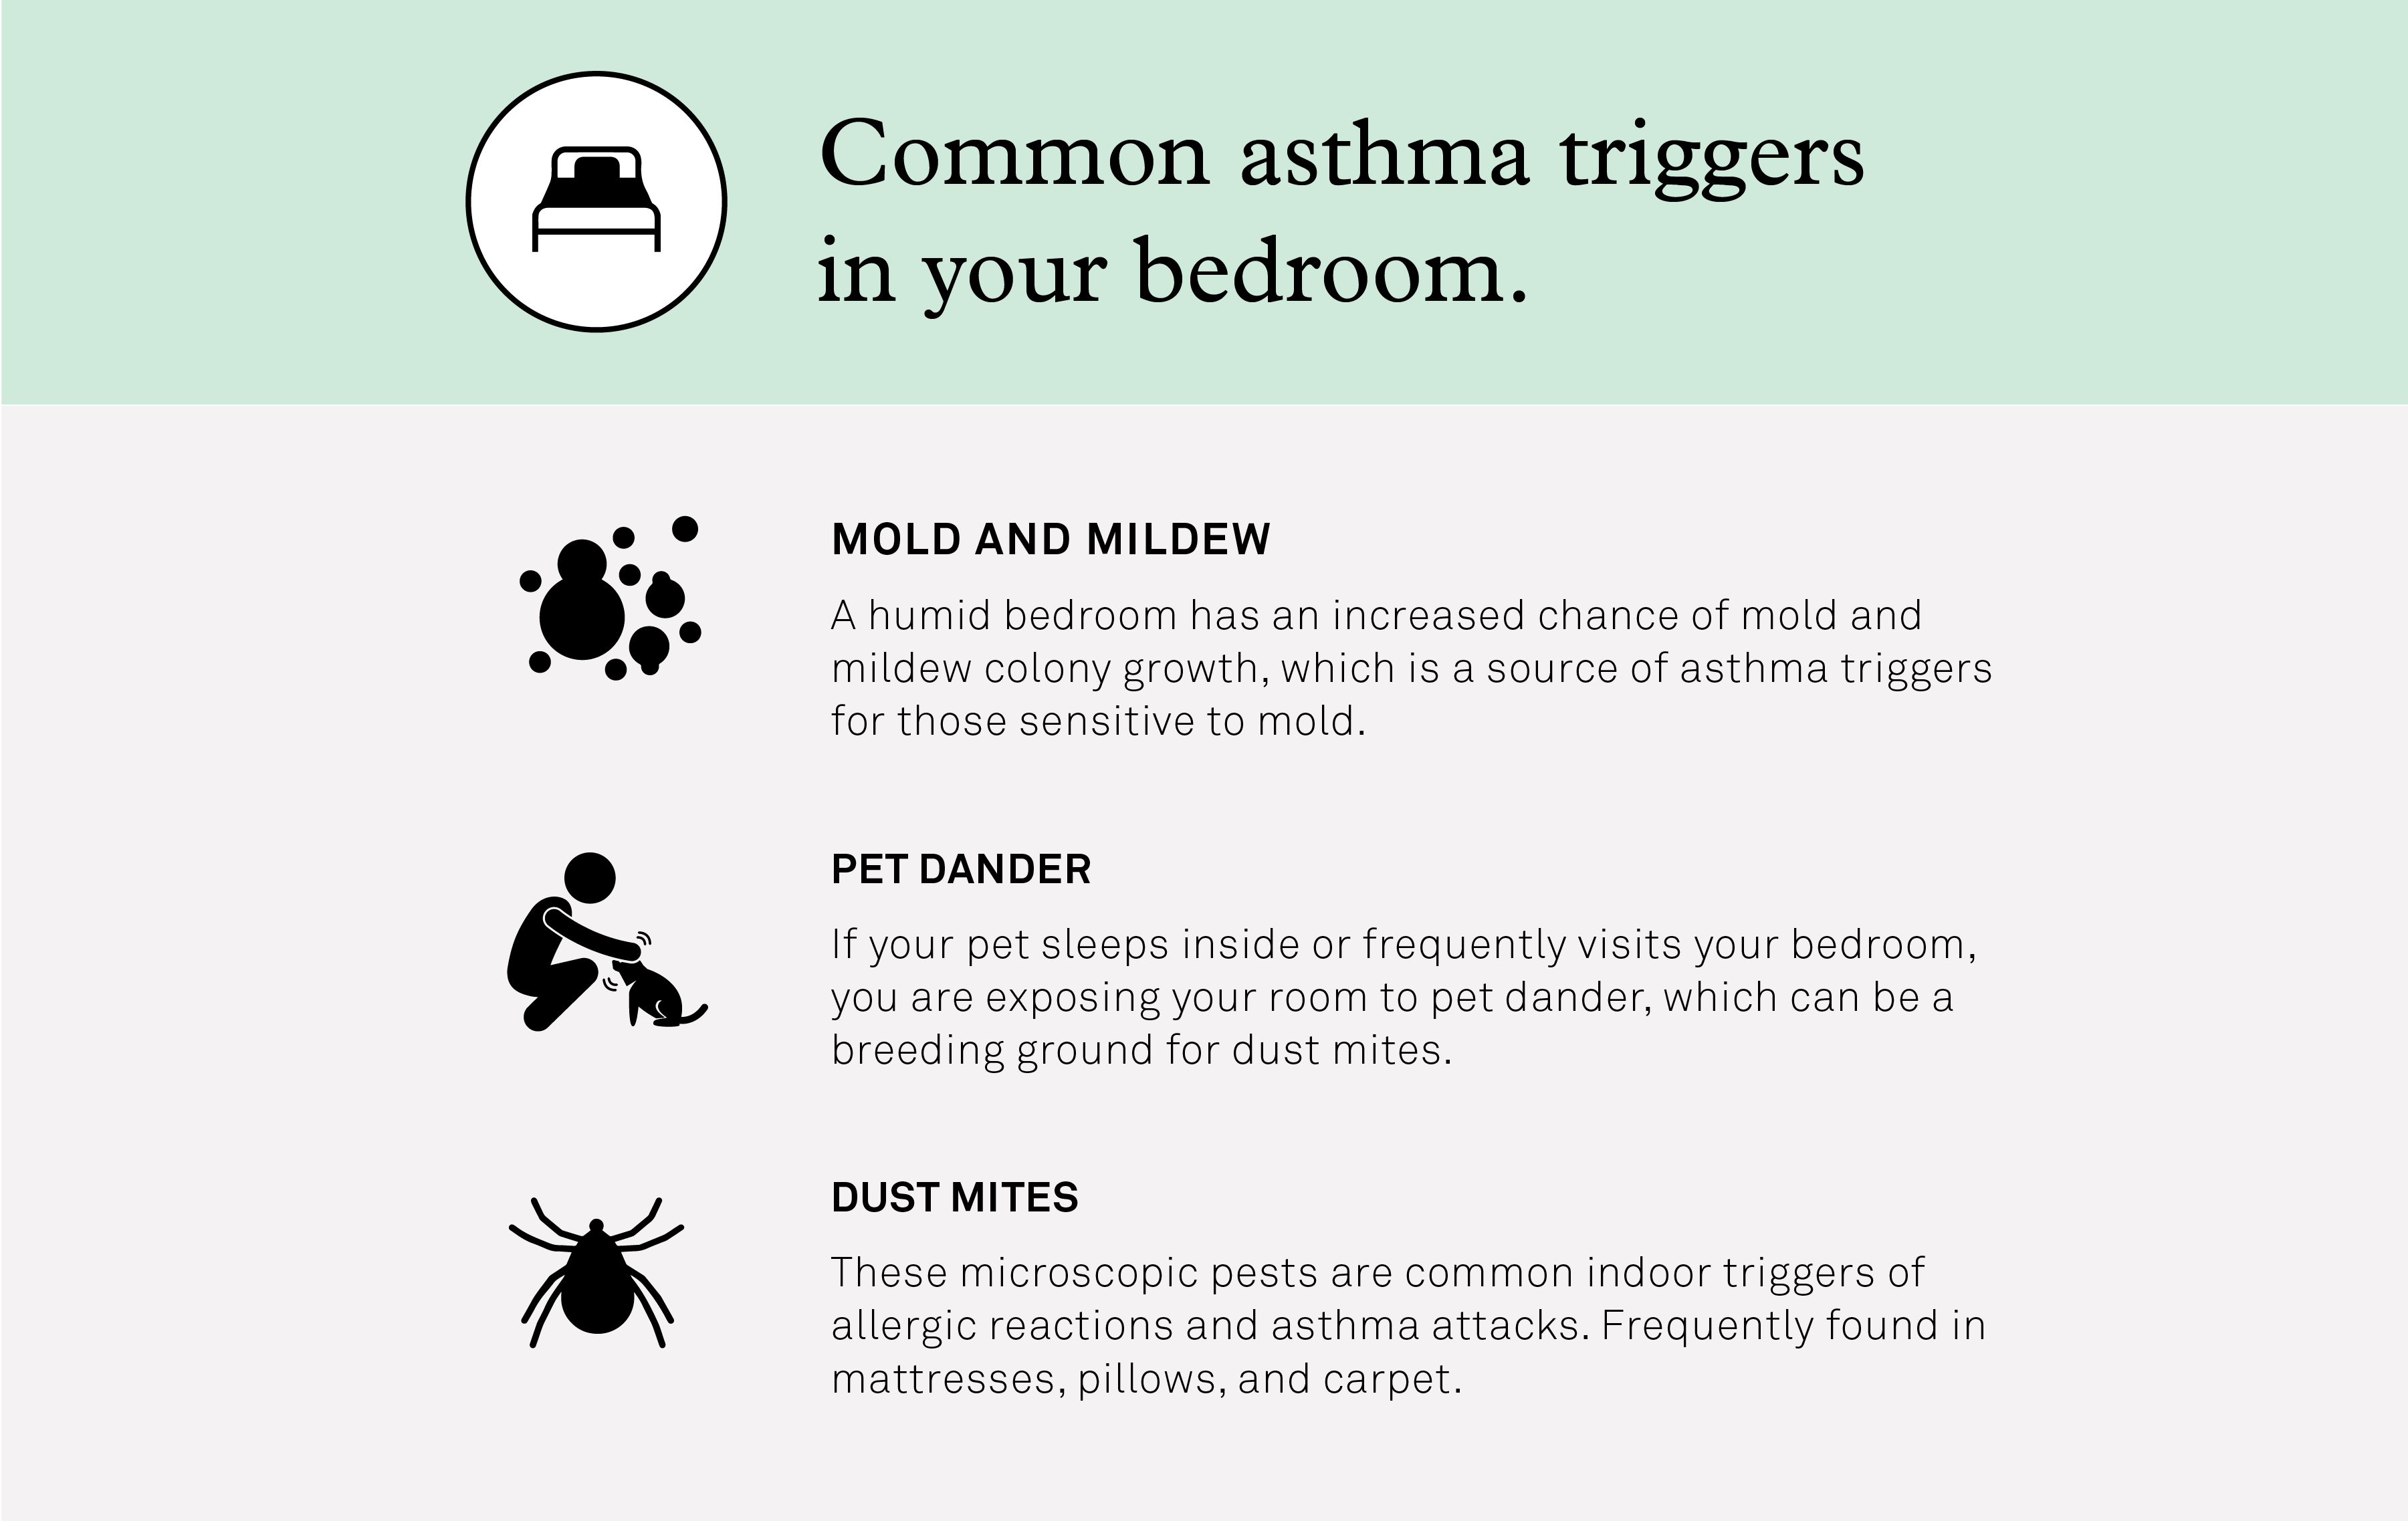 Asthma Triggers in Bedroom